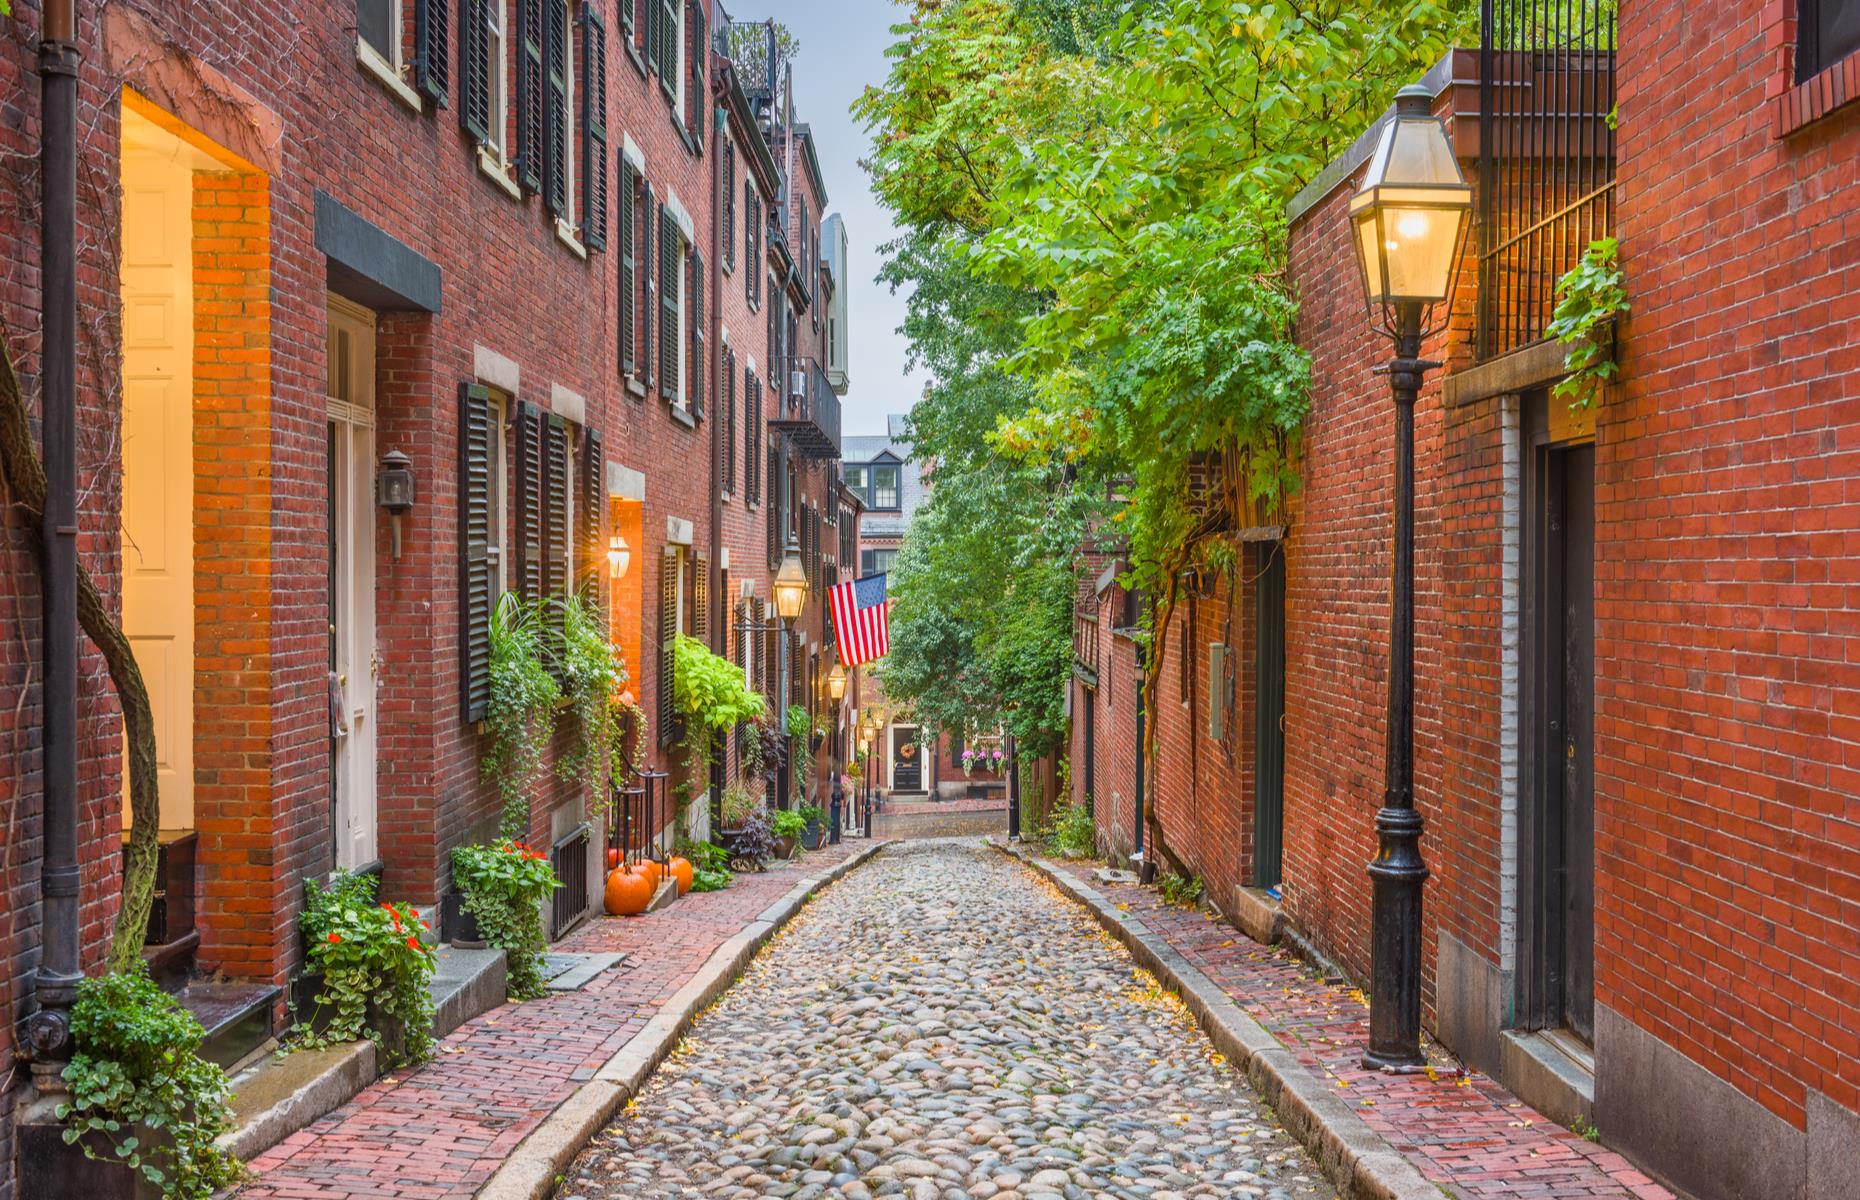 Slide 58 of 100: Acorn Street, in Boston's charming Beacon Hill neighborhood, is often tipped as the most photographed street in the country – and it's not hard to see why. The snug cobblestoned lane is lined with gas lamps and red-brick row-houses draped with the American flag, their window boxes spilling with greenery. It swelled with tradespeople and makers in the 1800s and today the homes are worth millions of dollars.